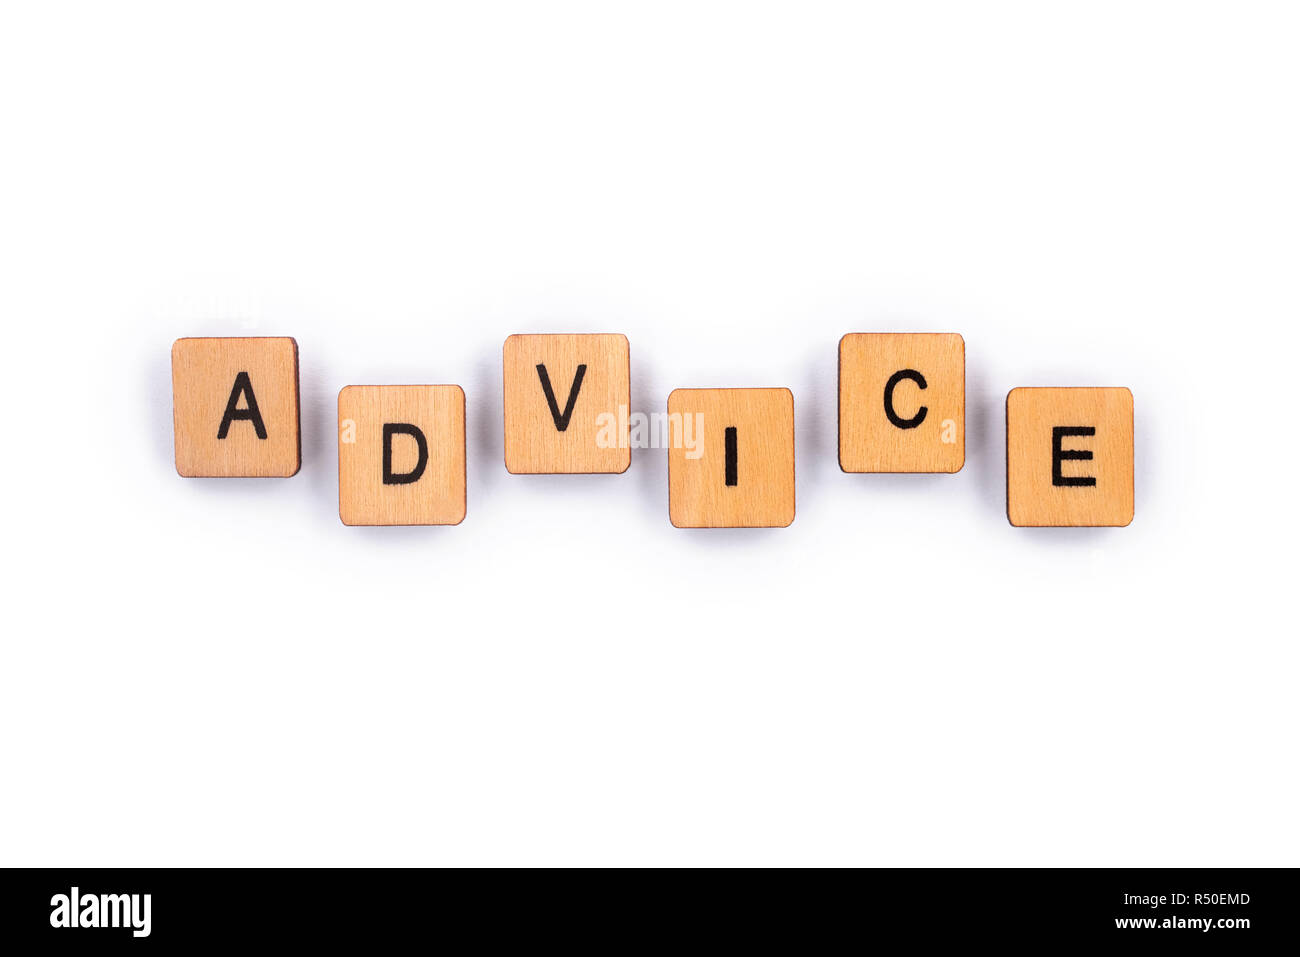 ADVICE, spelt with wooden letter tiles over a plain white background. Stock Photo